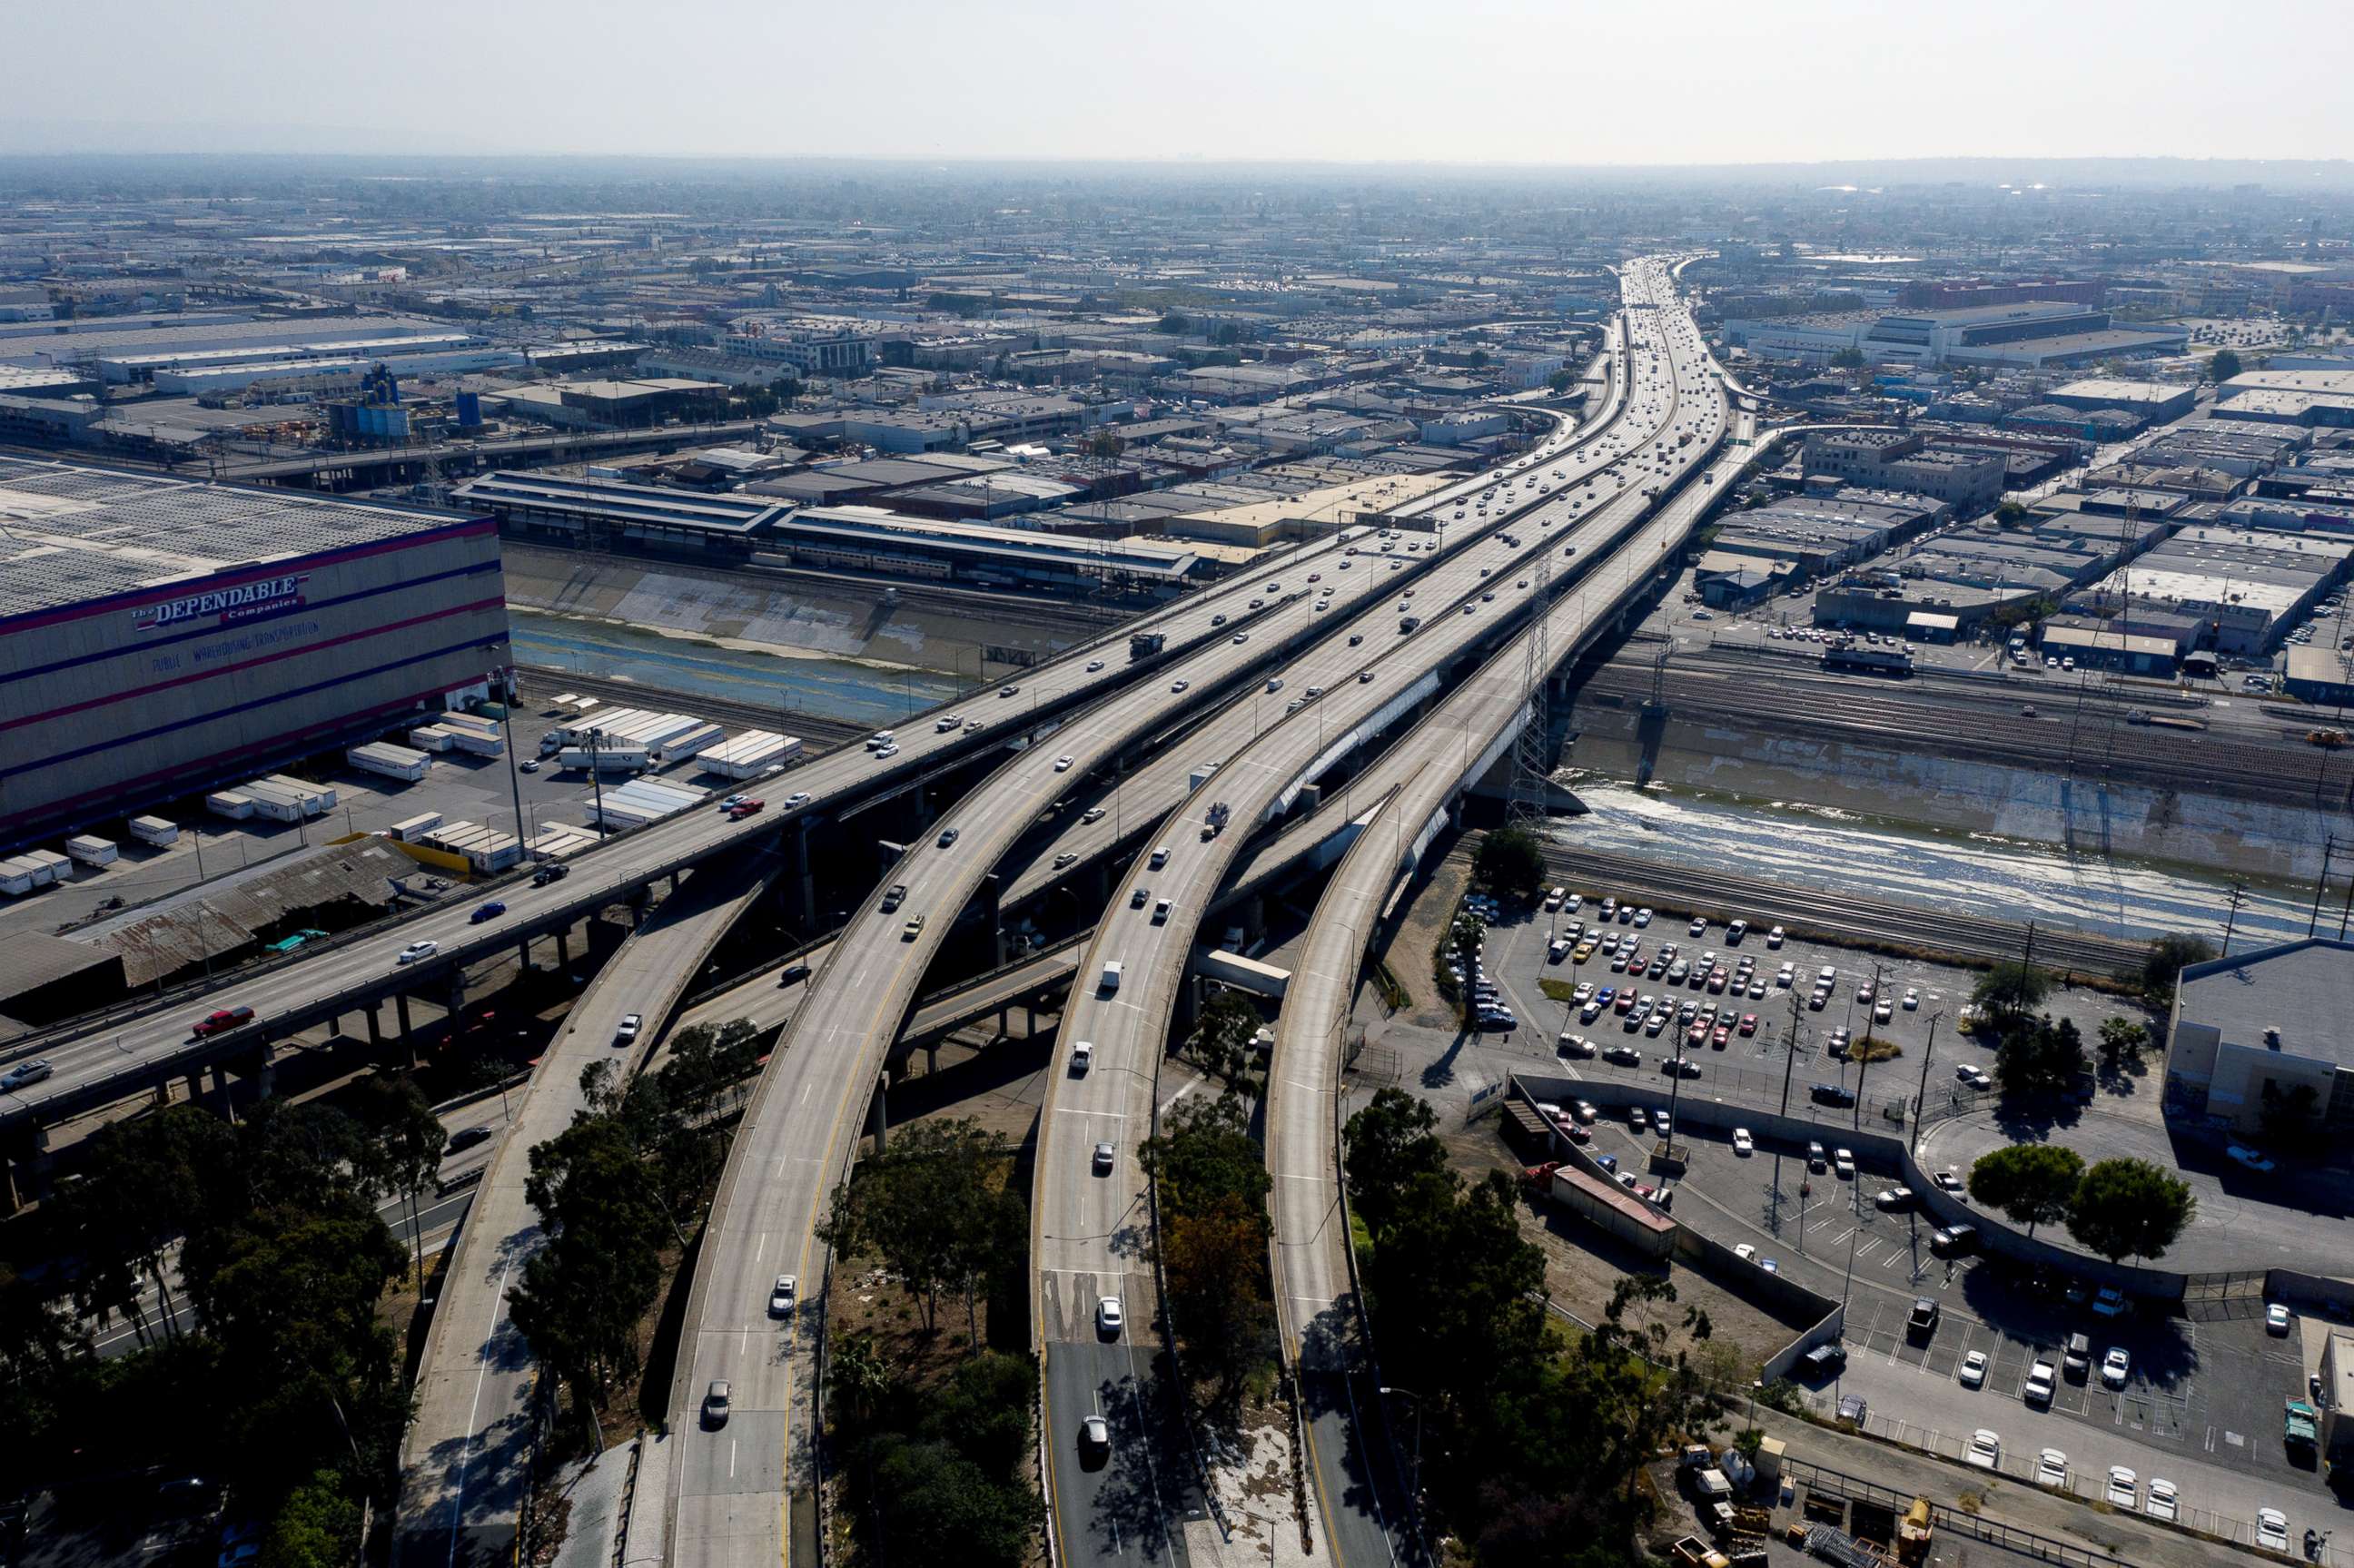 PHOTO: Vehicles travel along Interstate 5, Interstate 10, U.S. Route 101, and State Route 60 on the East Los Angeles Interchange in the Boyle Heights neighborhood of Los Angeles, April 6, 2021.